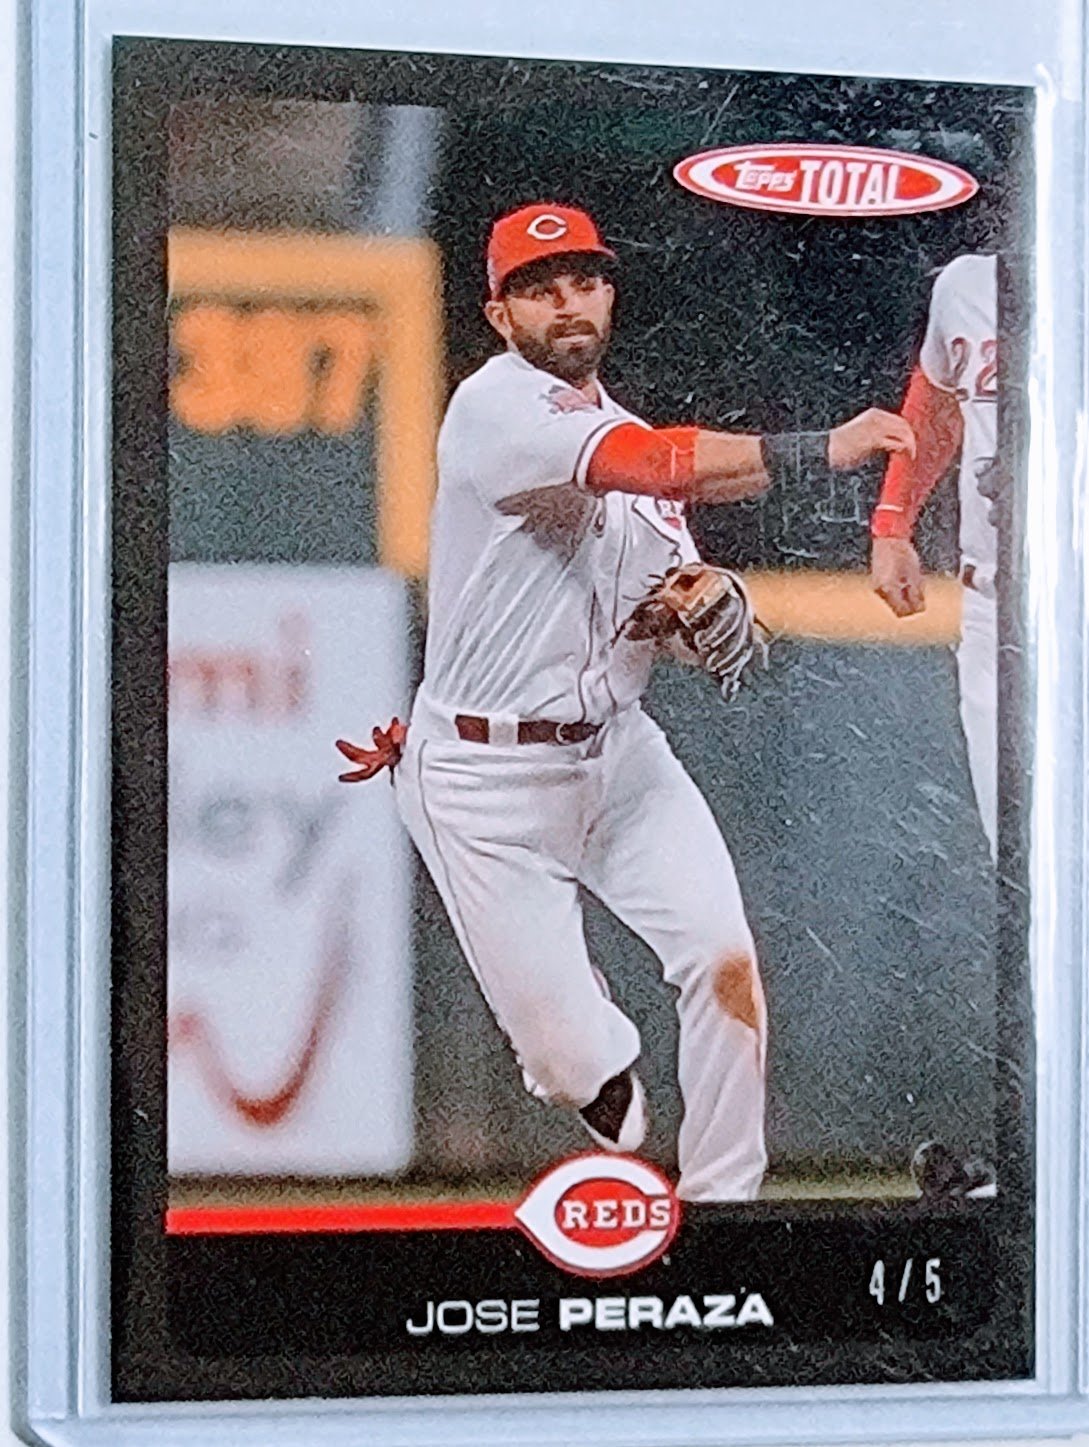 2020 Topps Total Jose Peraza Black #'d 4/5 Baseball Card TPTV simple Xclusive Collectibles   